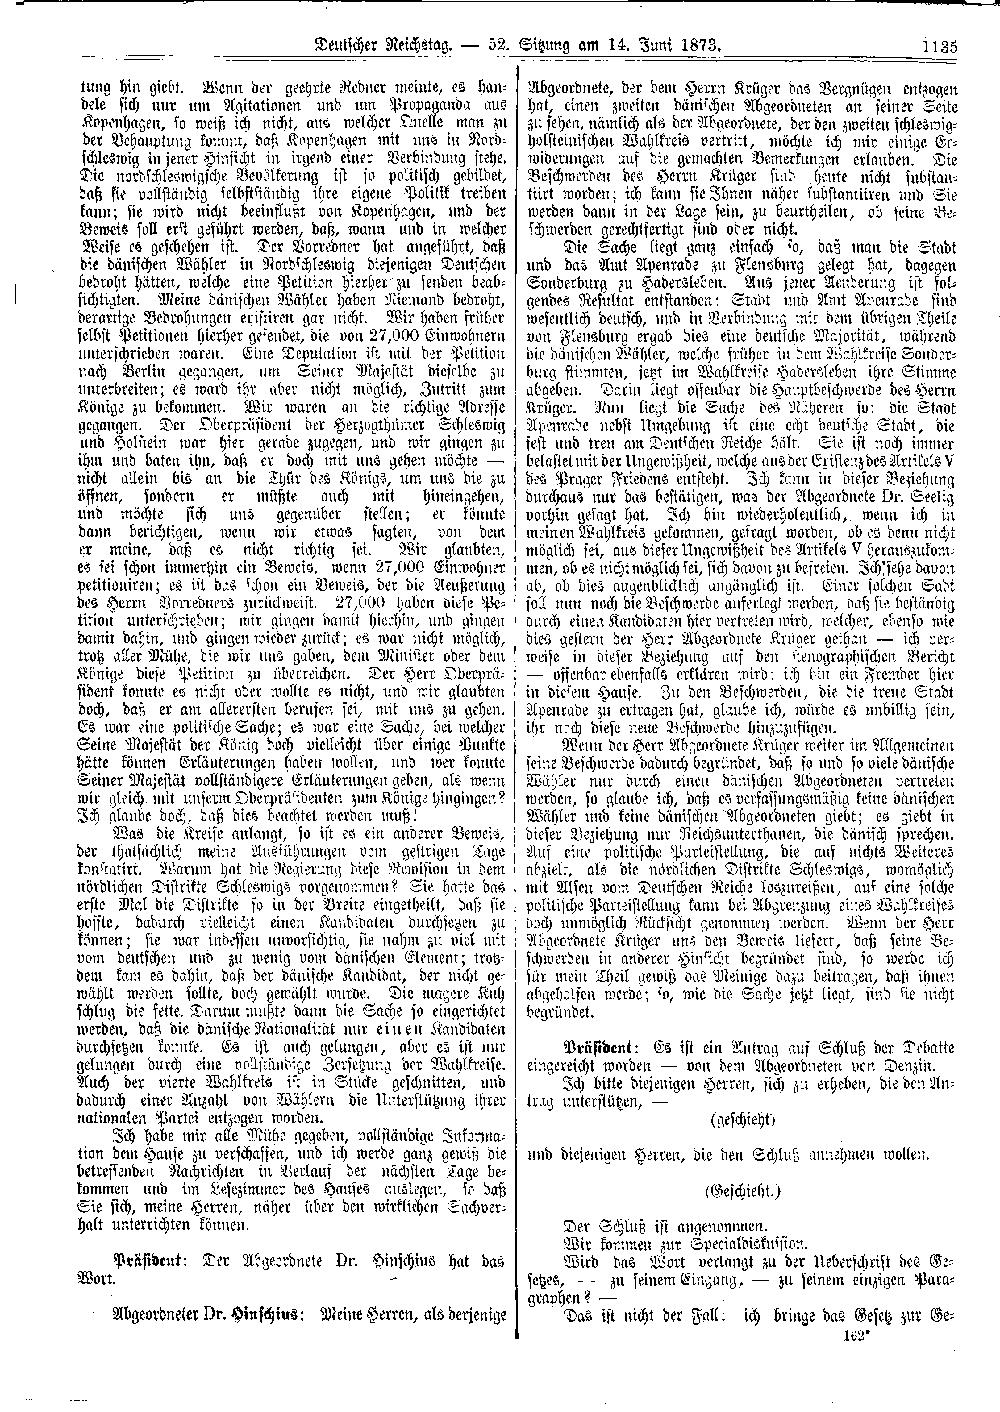 Scan of page 1135